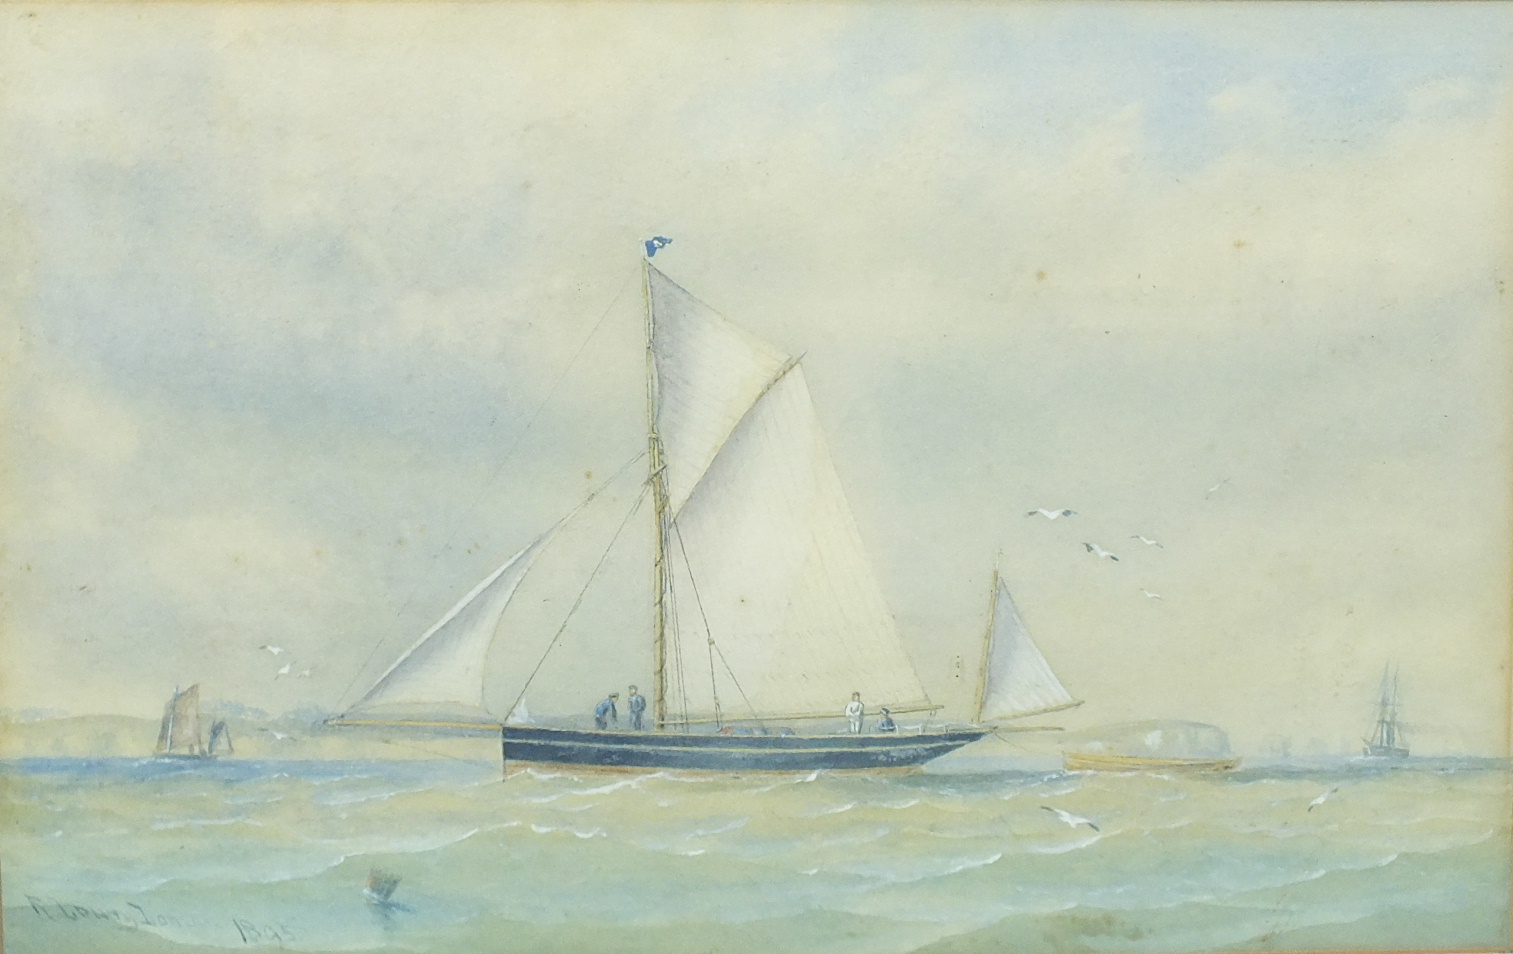 R Lowry Lomax (19th/20th century) YACHT THISTLE Signed watercolour, dated 1895 and titled on label